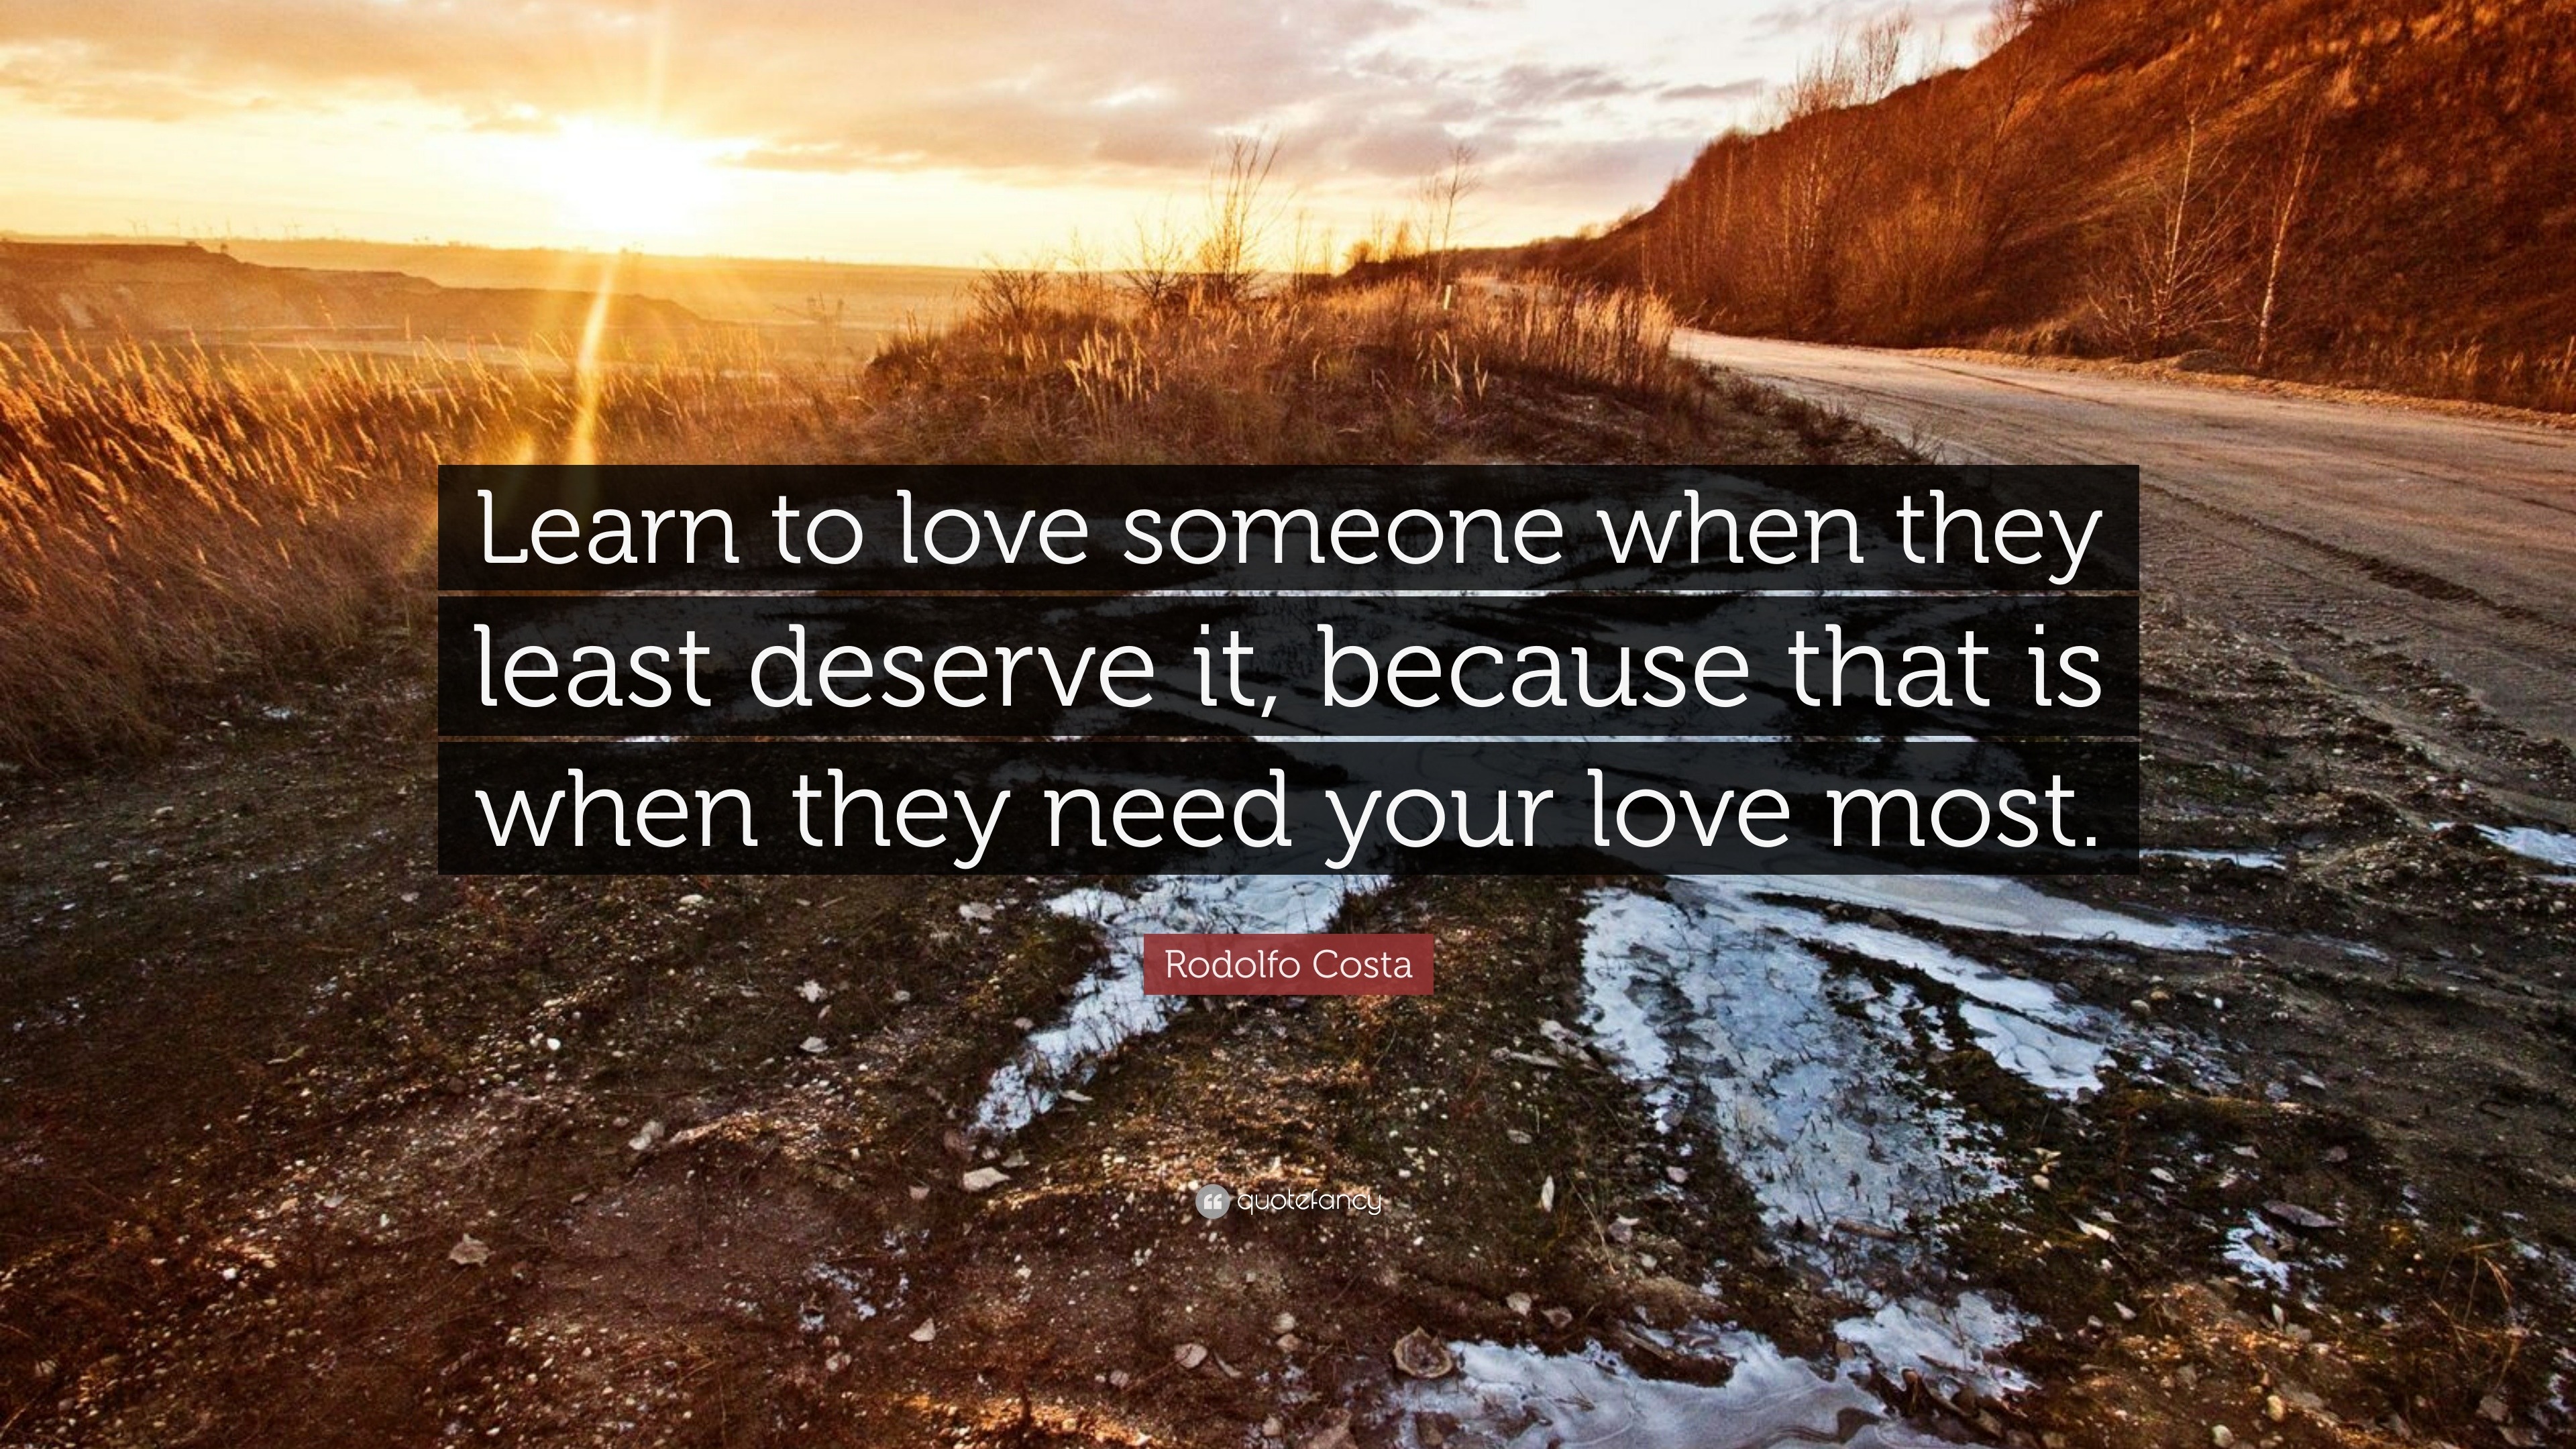 Rodolfo Costa Quote “Learn to love someone when they least deserve it because